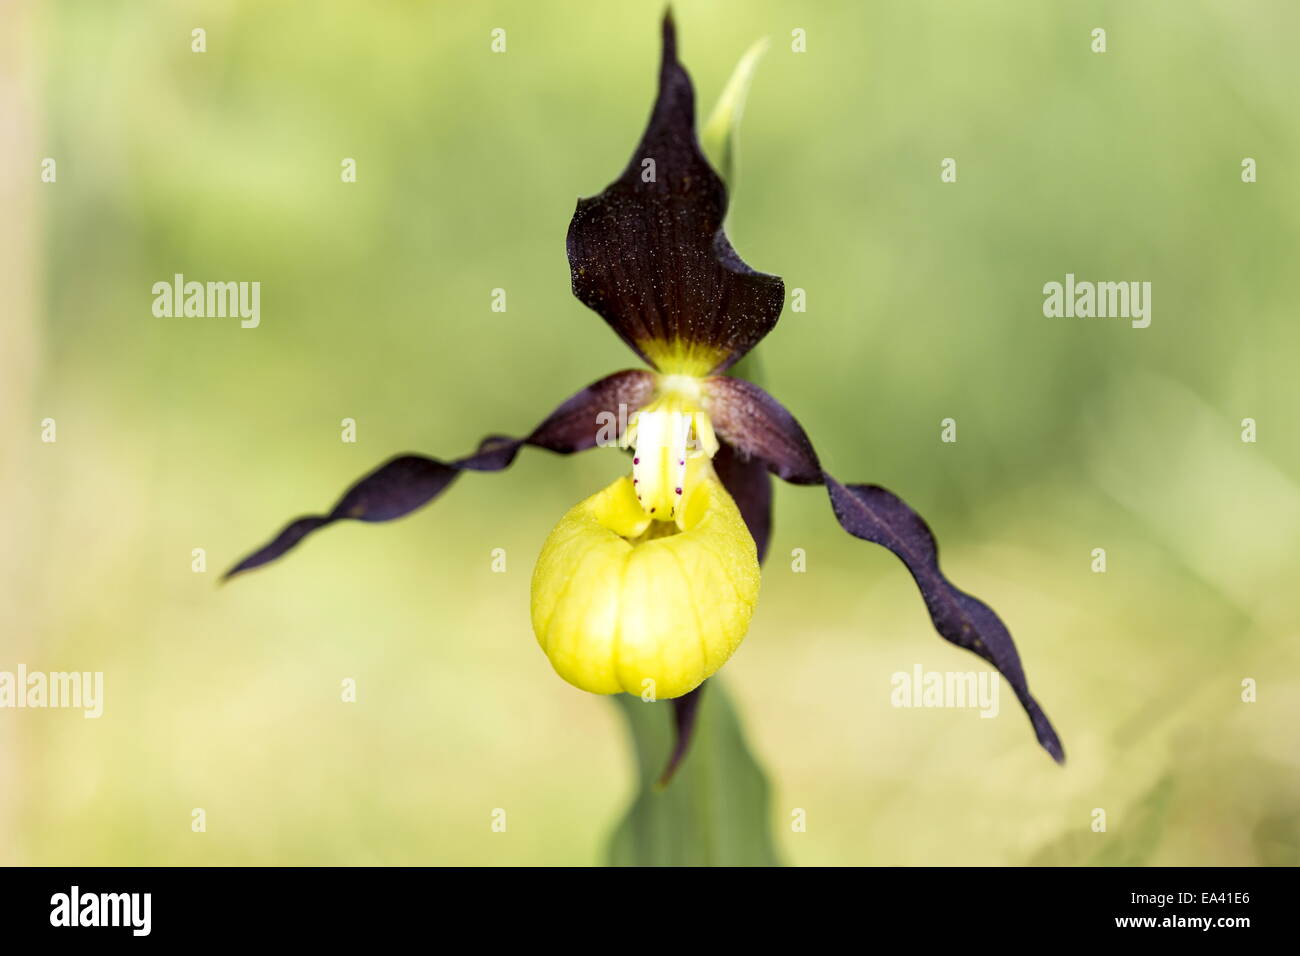 on orchid flower Stock Photo